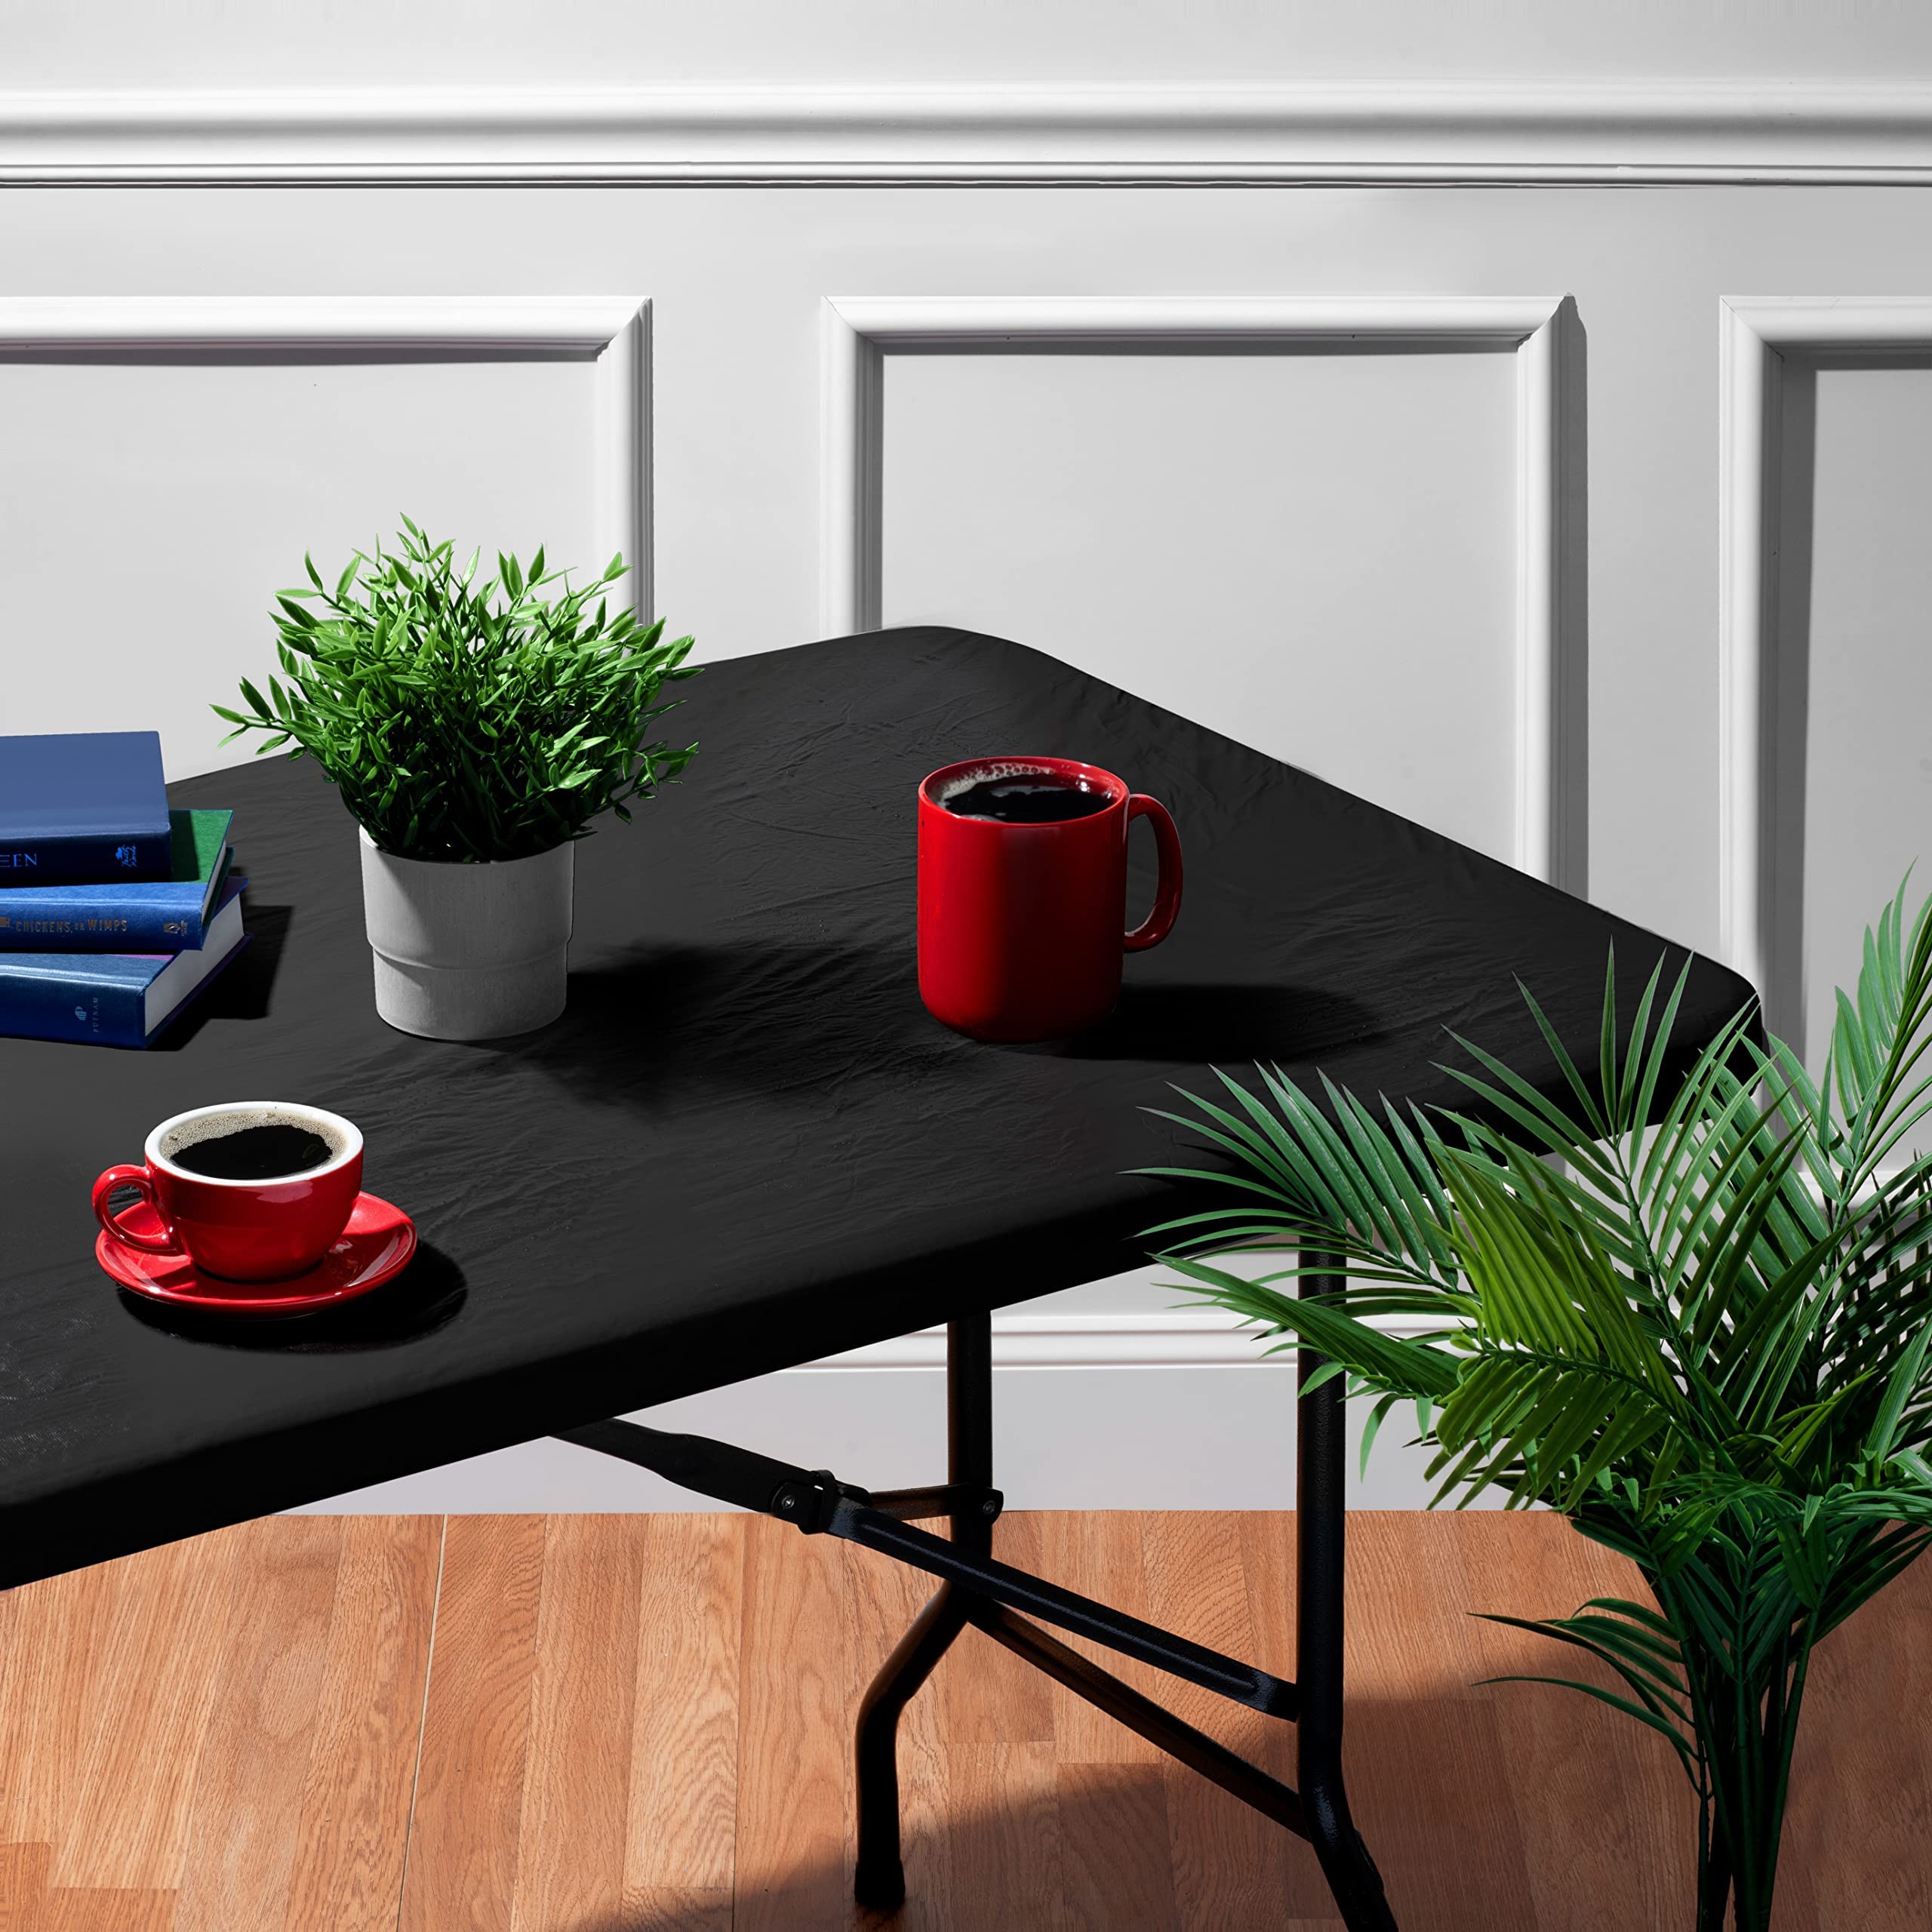 Sorfey Tablecover -Fitted with Elastic, Vinyl with Flannel Back, Fits for Table 30" to 36" W x 96" L Rectangle Stretchable Conveniently,Water Proof, Easy to Clean, Checked Red Design  - Good